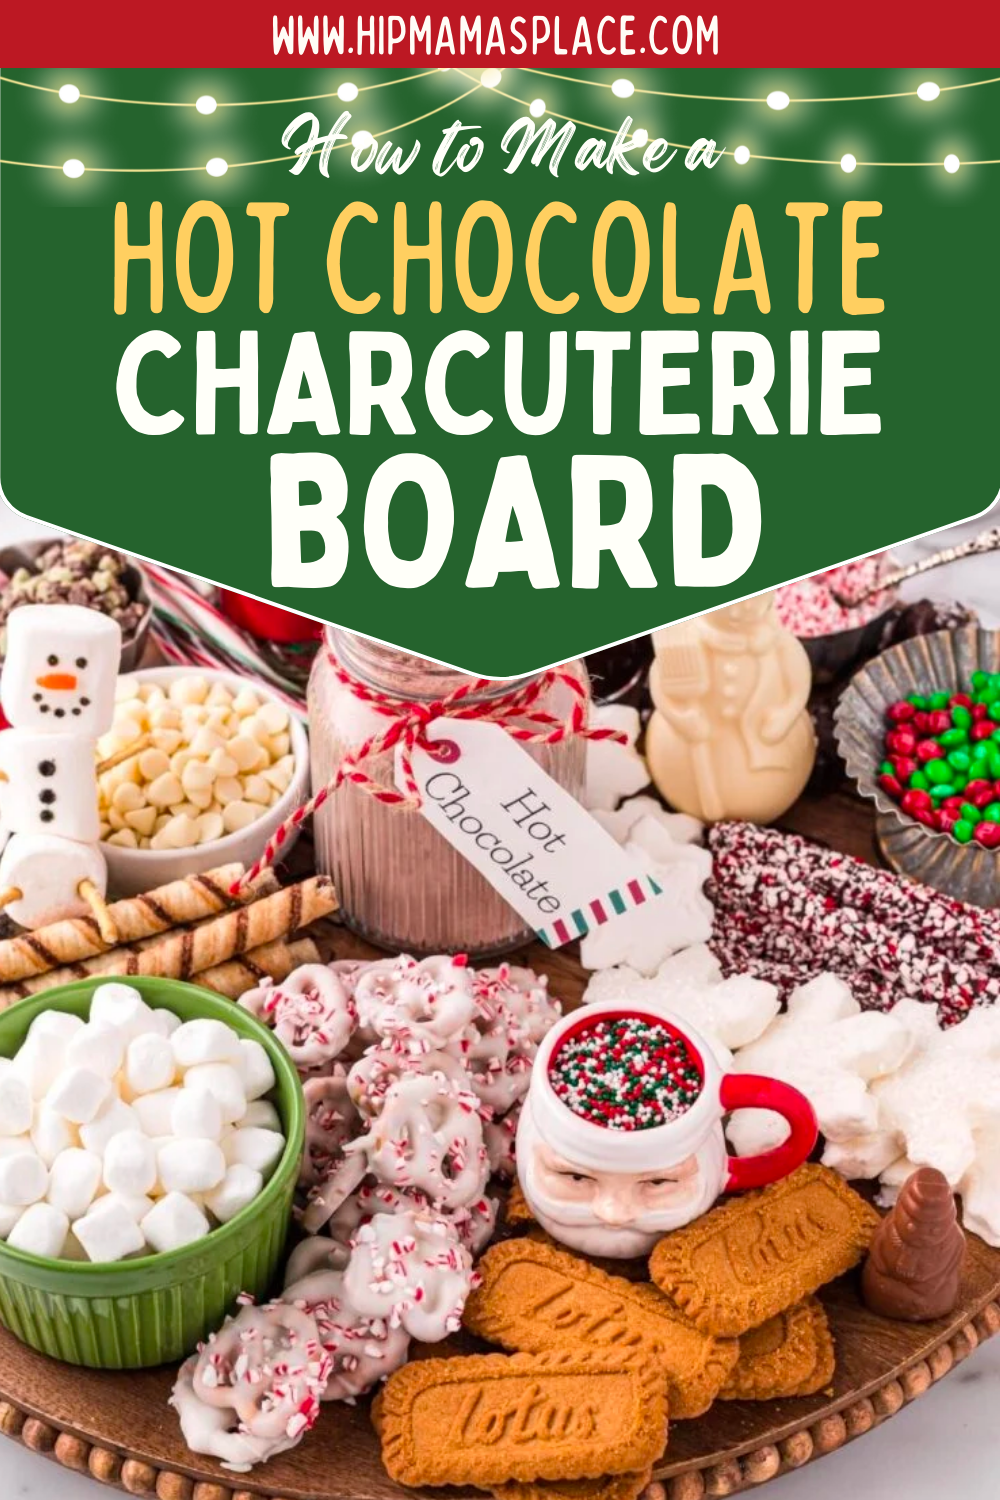 How to Make a Hot Chocolate Charcuterie Board